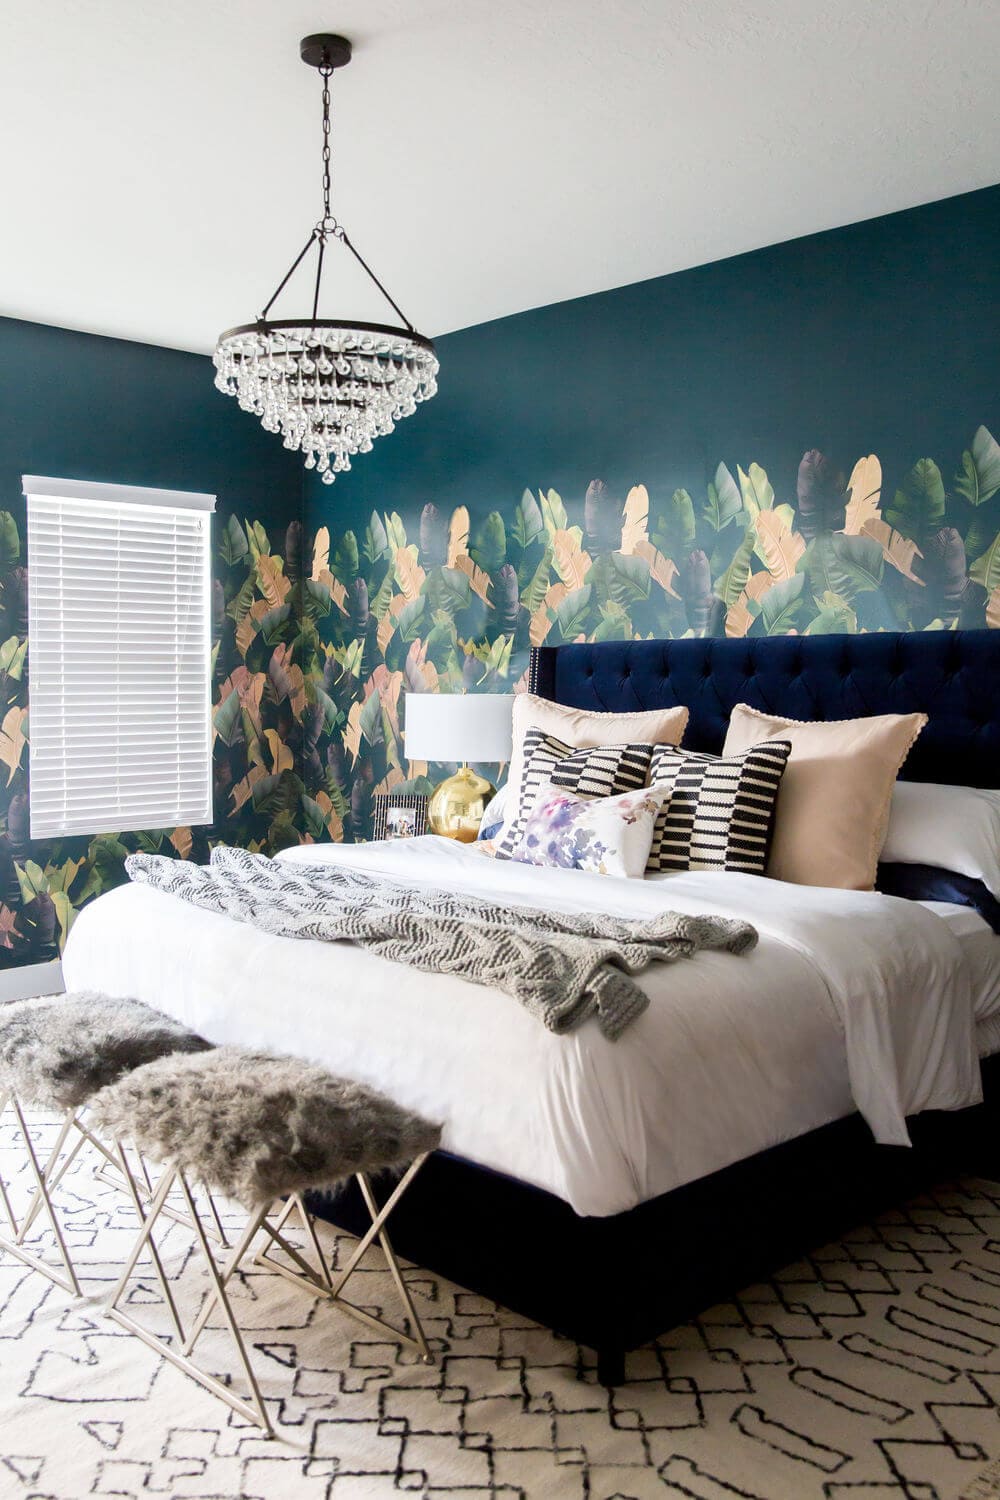 23 of the most appealing bedroom accent wall ideas this year - 75